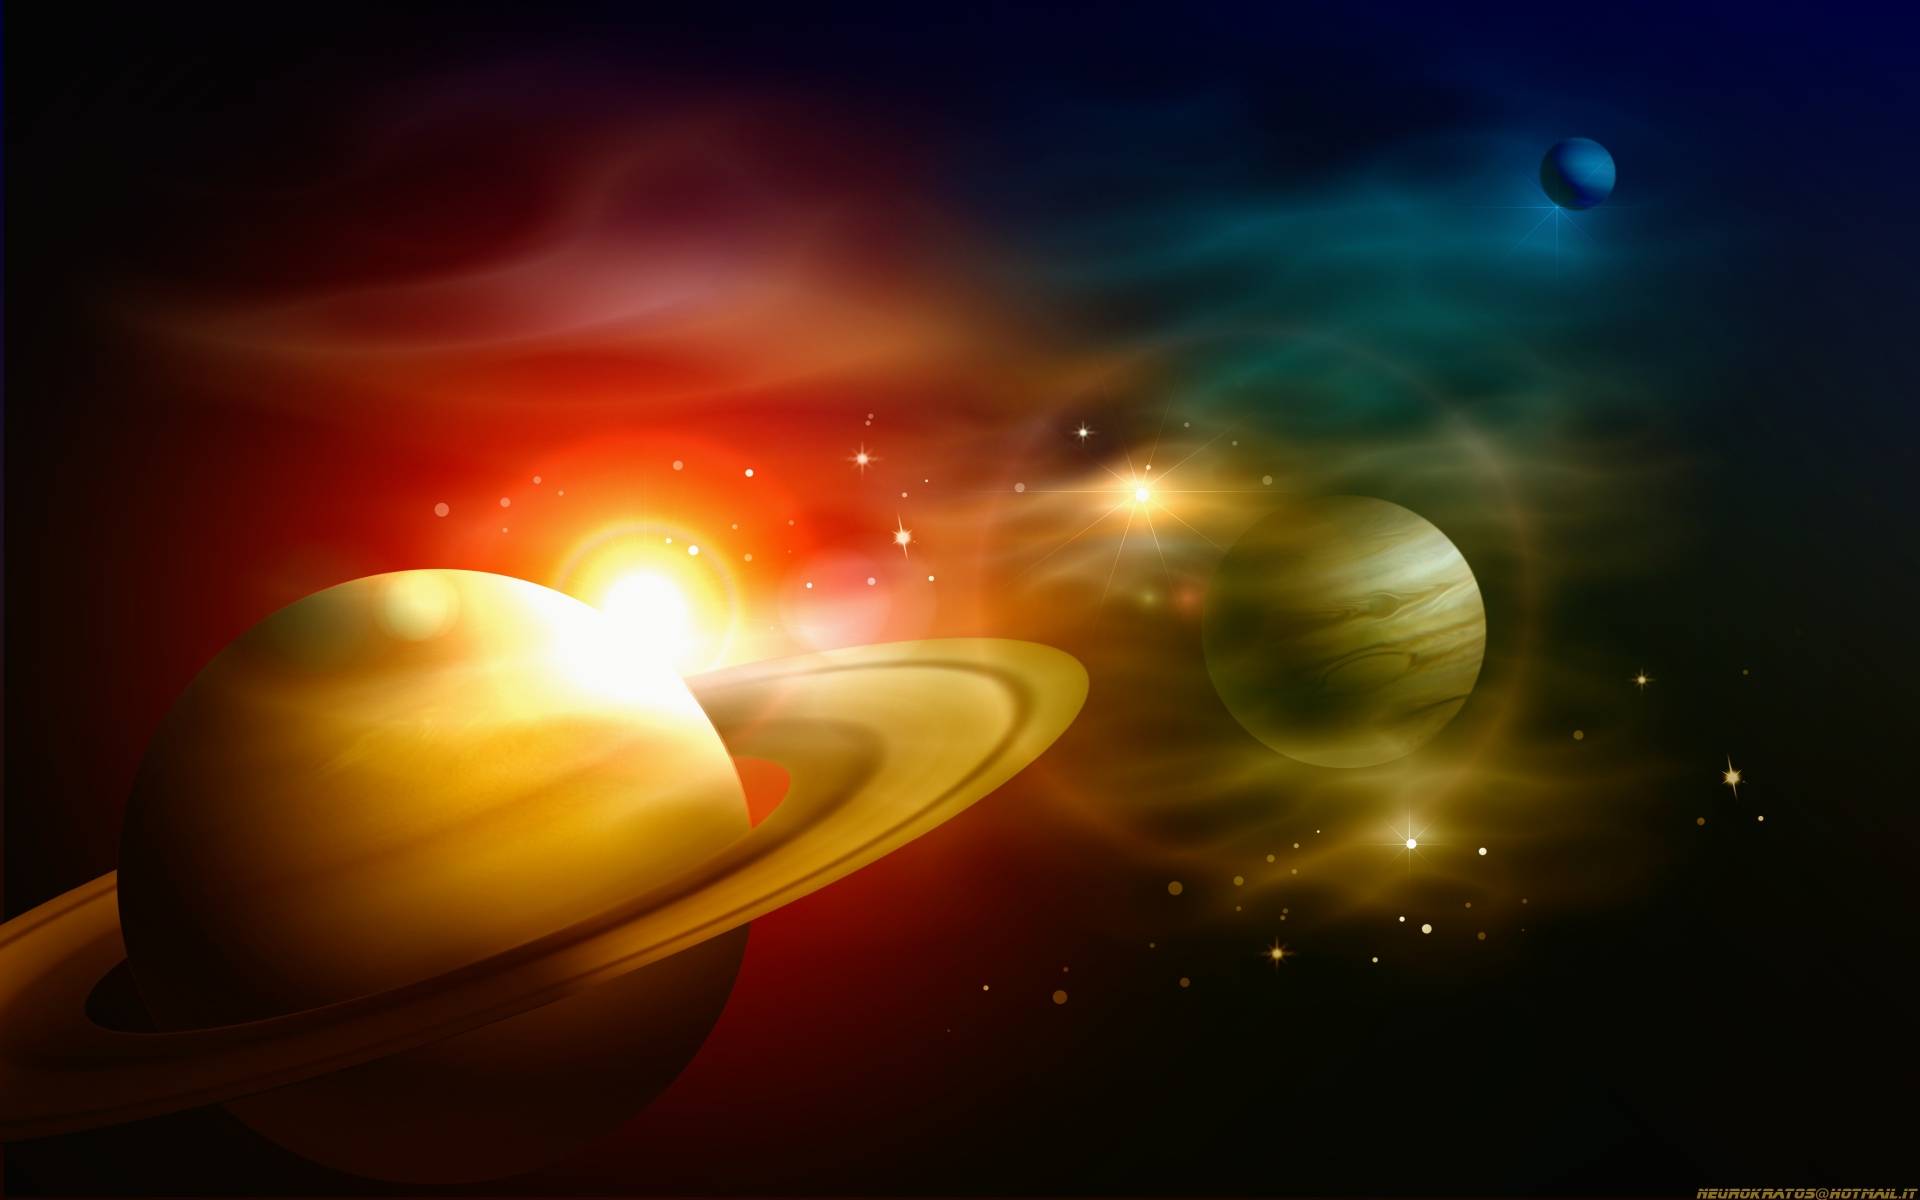  Space 3dspace Wallpapers For Desktop Backgrounds Free HD Wallpapers